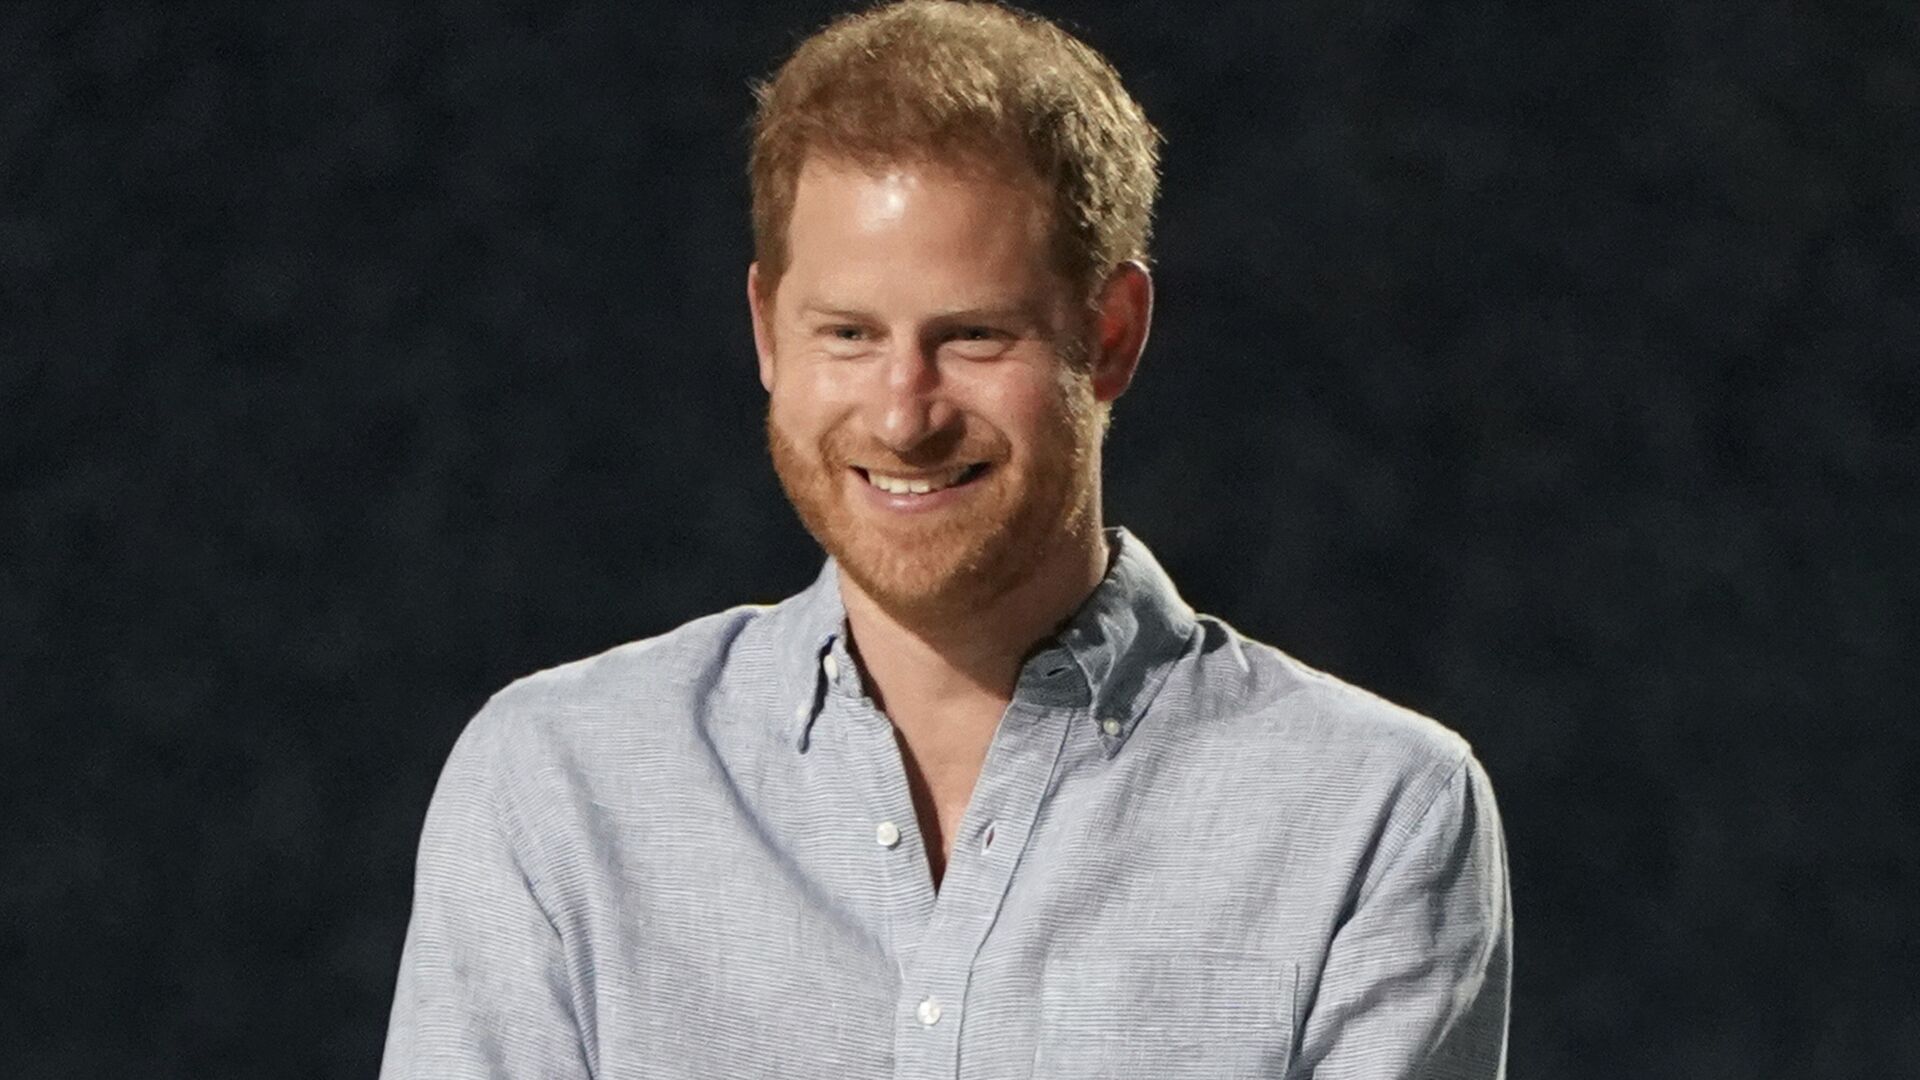 Prince Harry, Duke of Sussex, speaks at Vax Live: The Concert to Reunite the World on 2 May 2021, in Inglewood, California, US. - Sputnik International, 1920, 06.09.2021